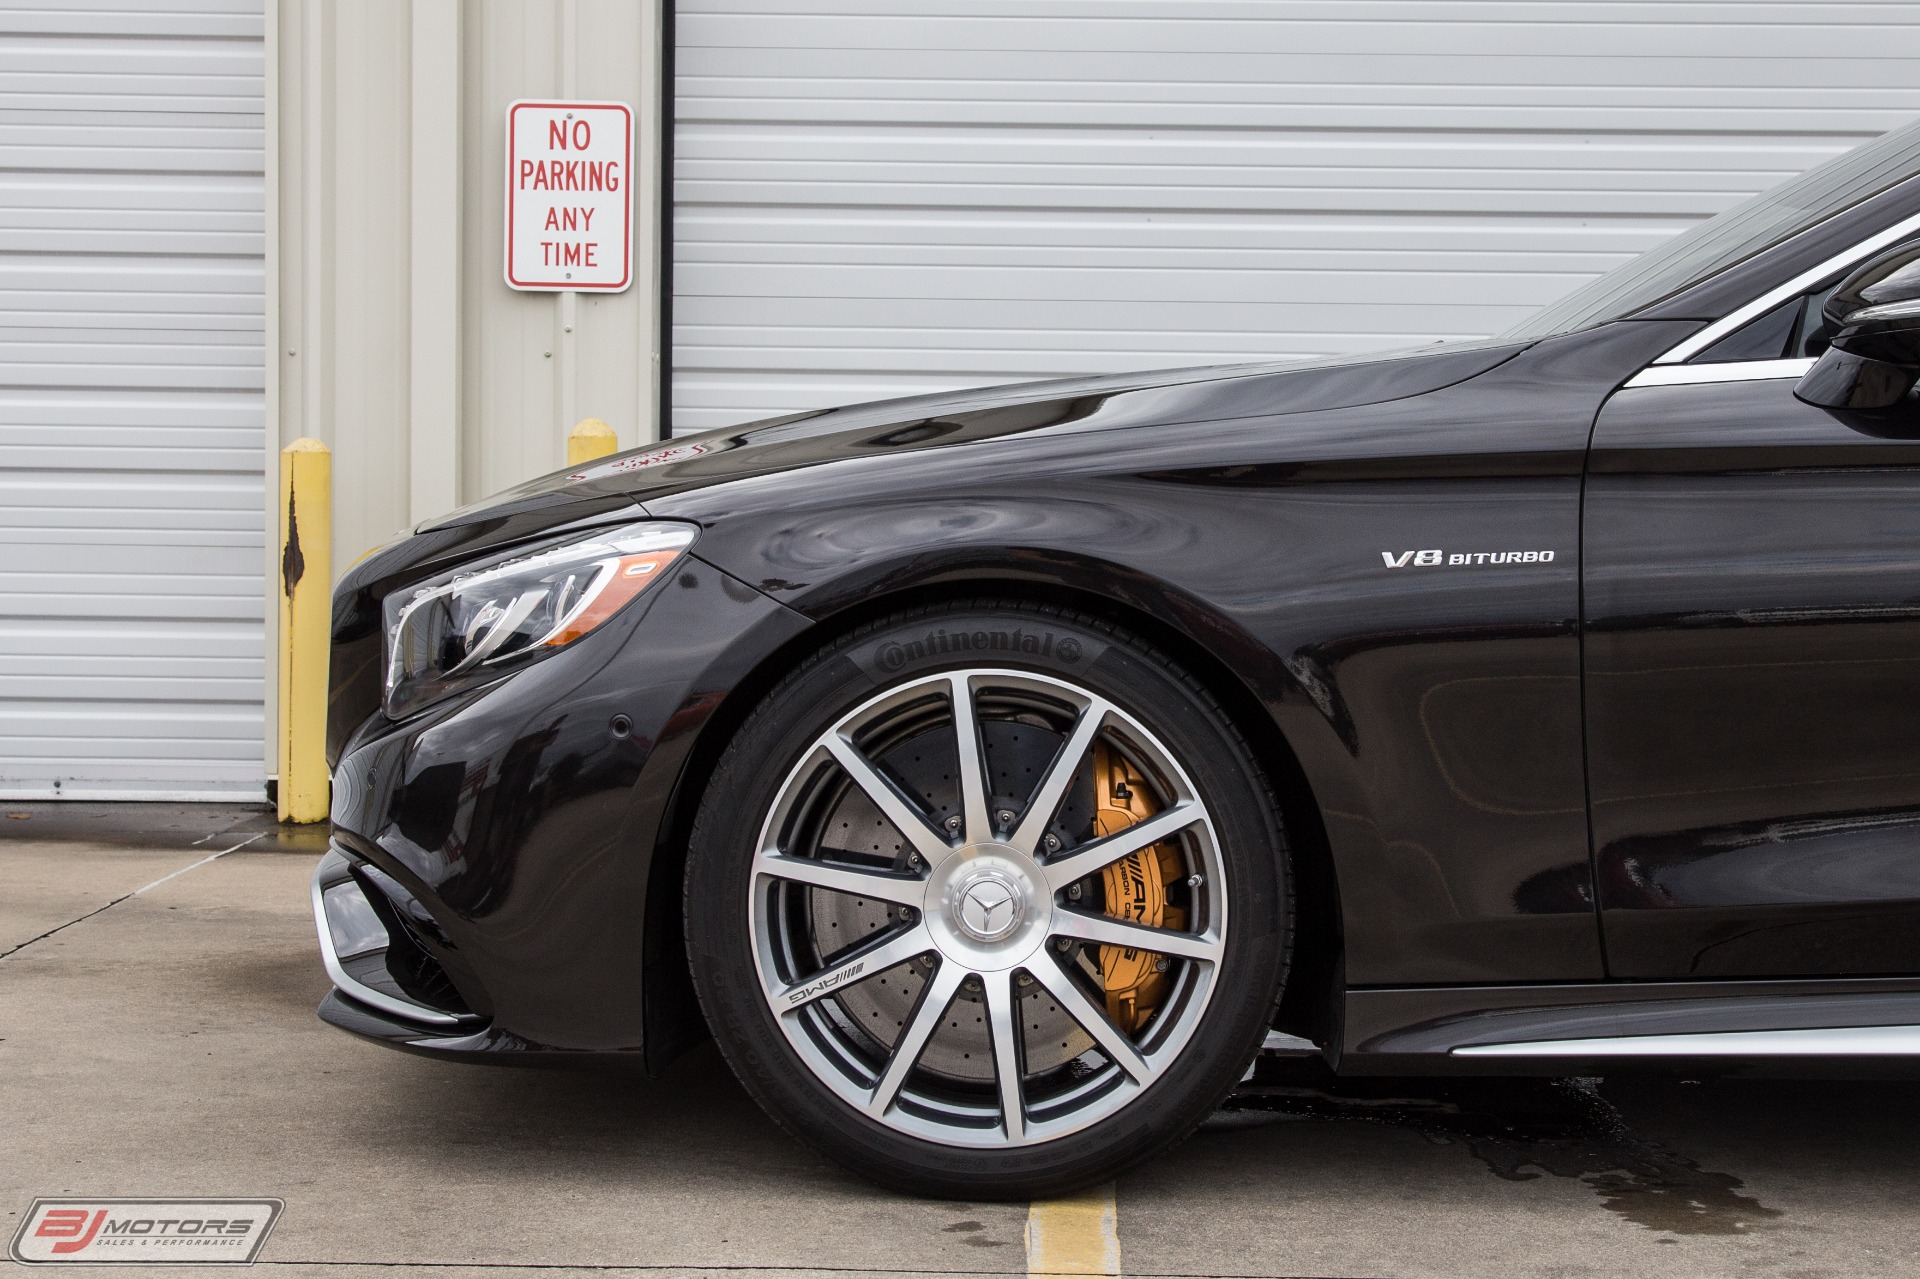 Used-2015-Mercedes-Benz-S-Class-S63-AMG